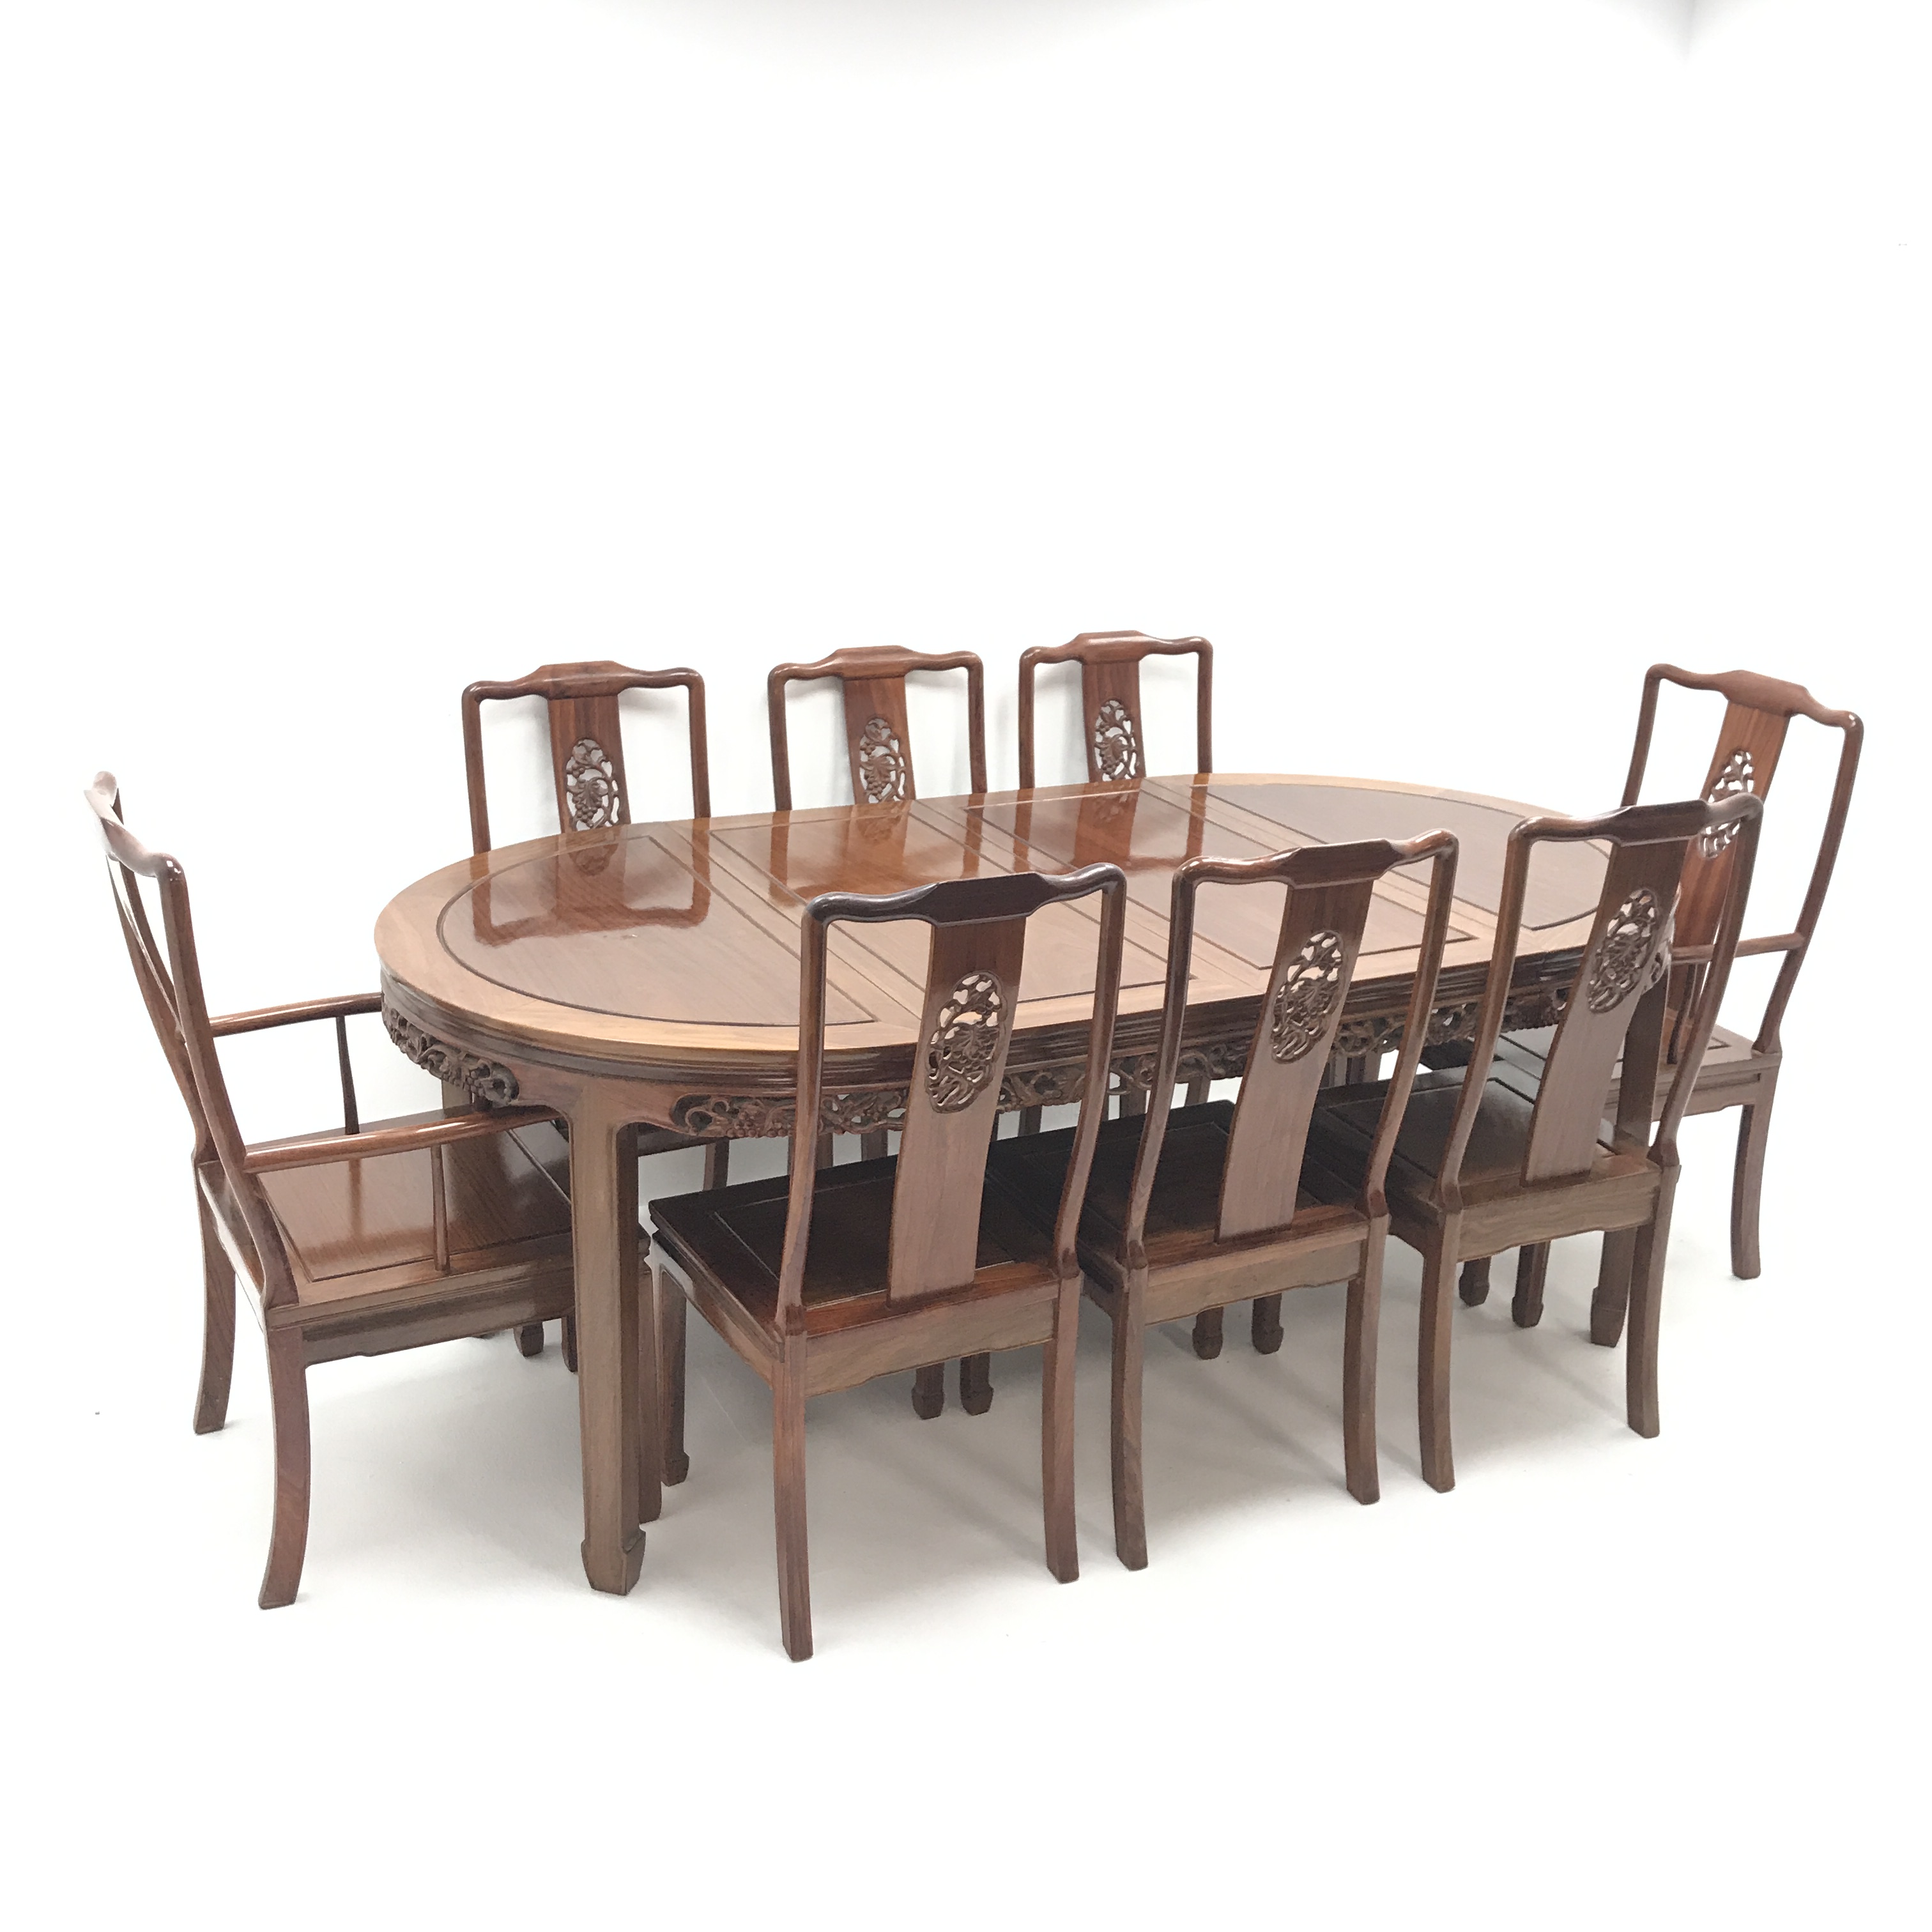 Chinese hardwood extending dining table with two leaves, pierced apron,